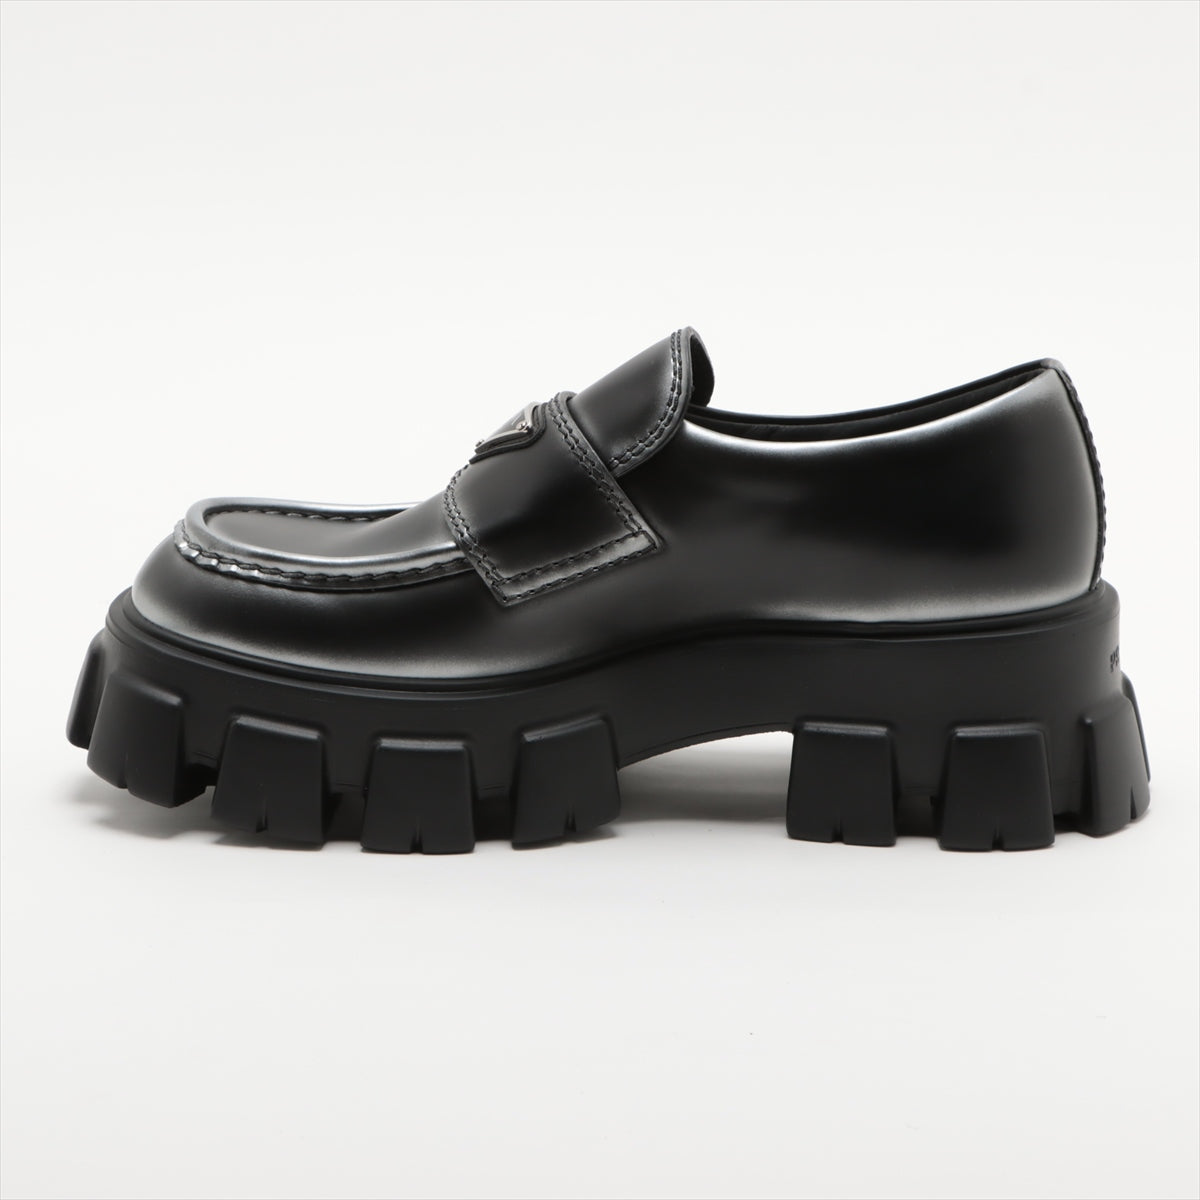 Prada Monolith brushed leather Loafer 5.5 Men's Black × Silver 2DE129 Gradation Box There is a storage bag